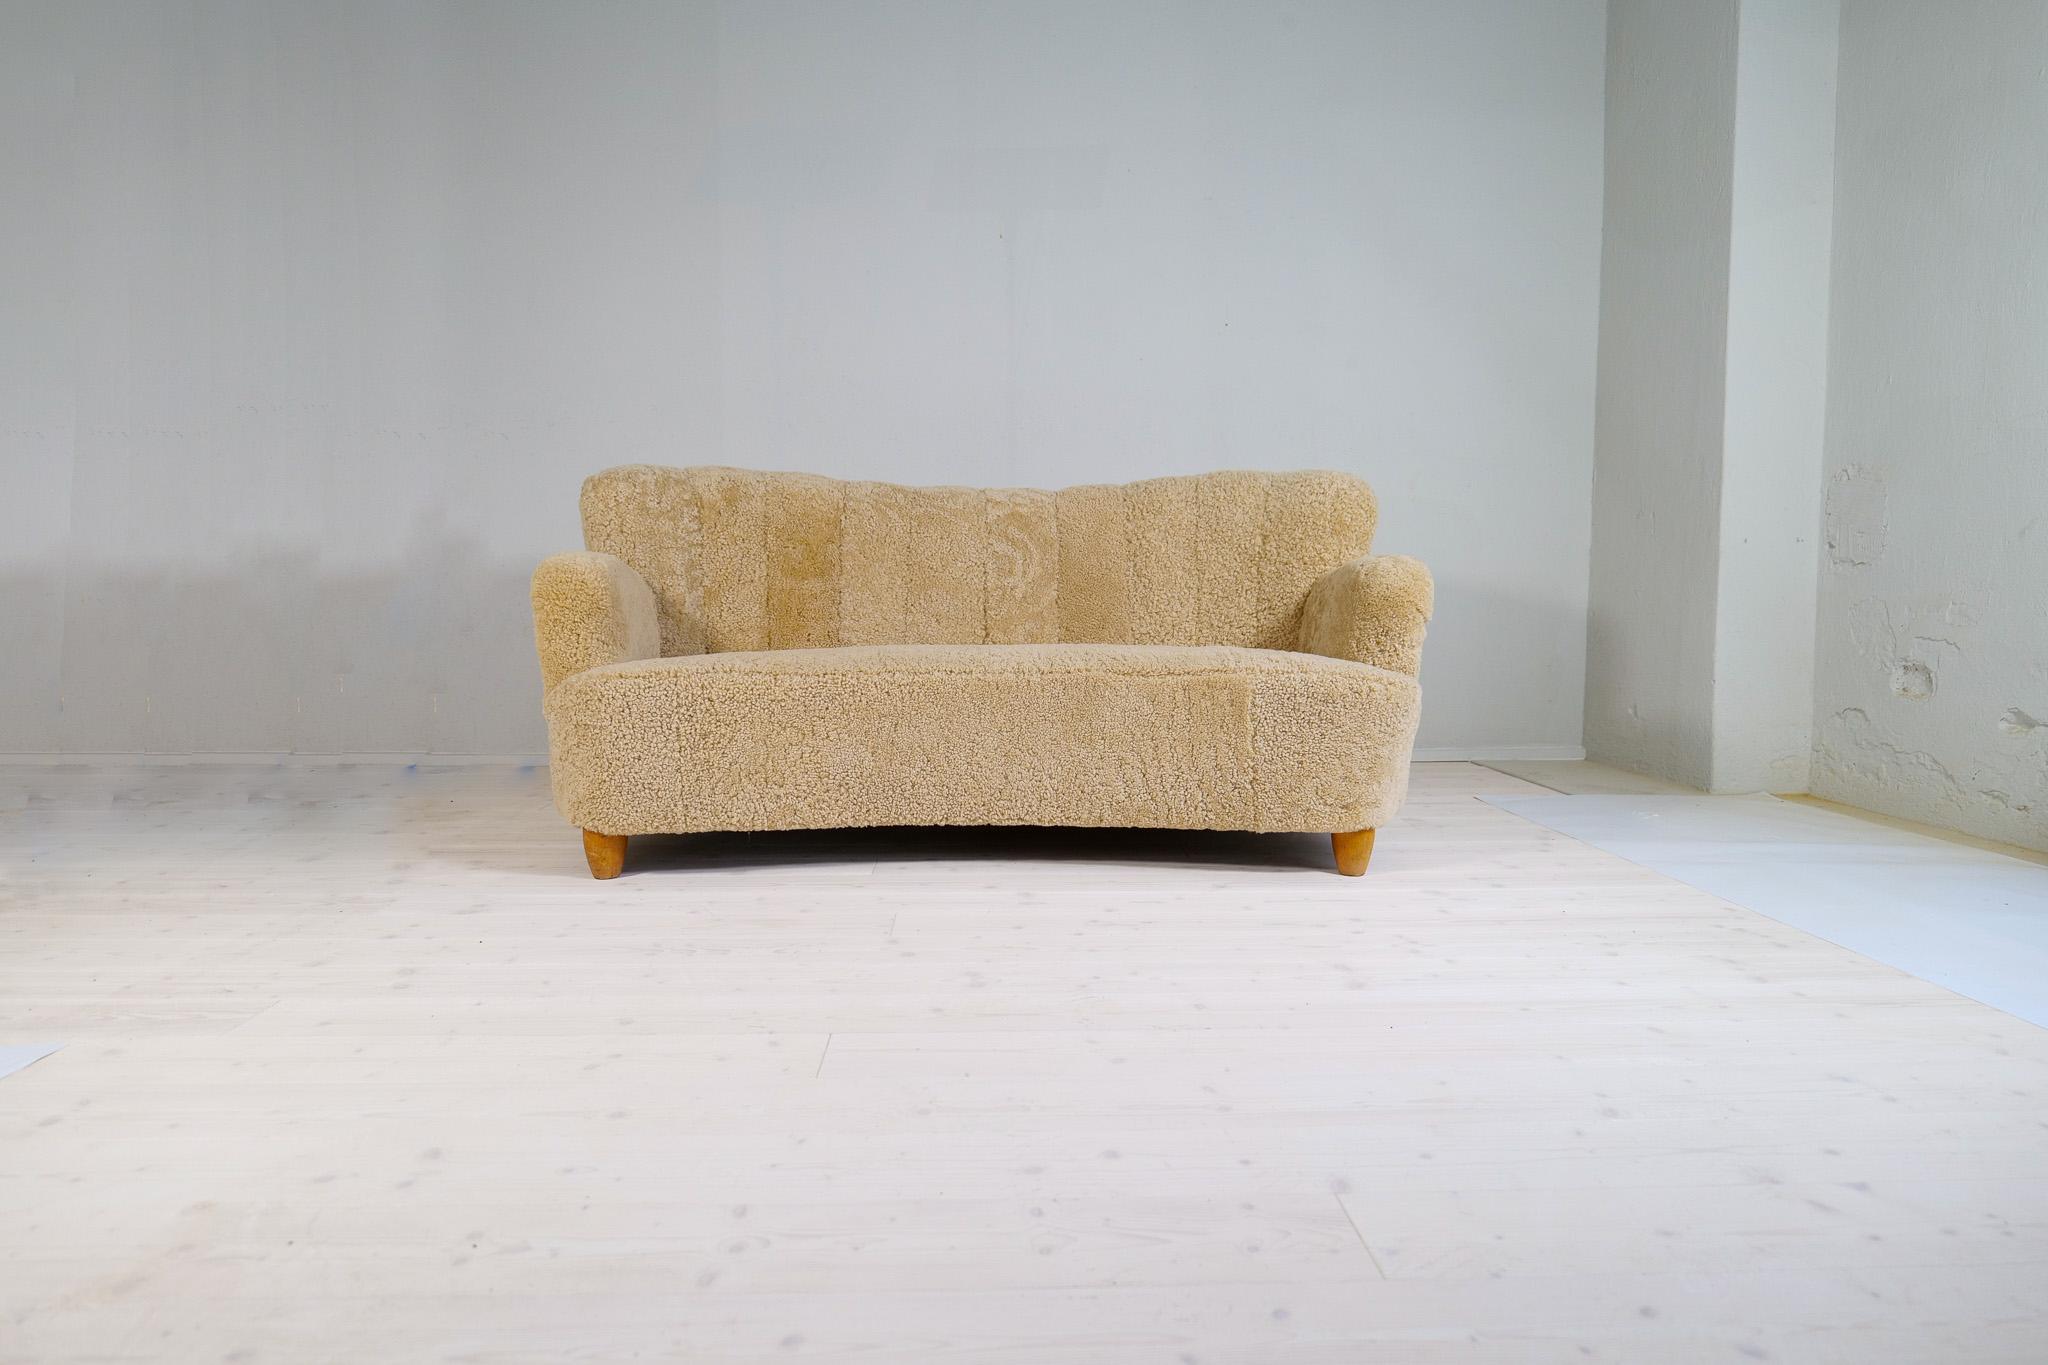 This sculptural sofa with its curvy frame was produced in the early 1940s. The sofa has been fully reupholstered and now have its beautiful light brown / honey sheepskin/shearling. The structure and legs are made in polished birch with wonderful